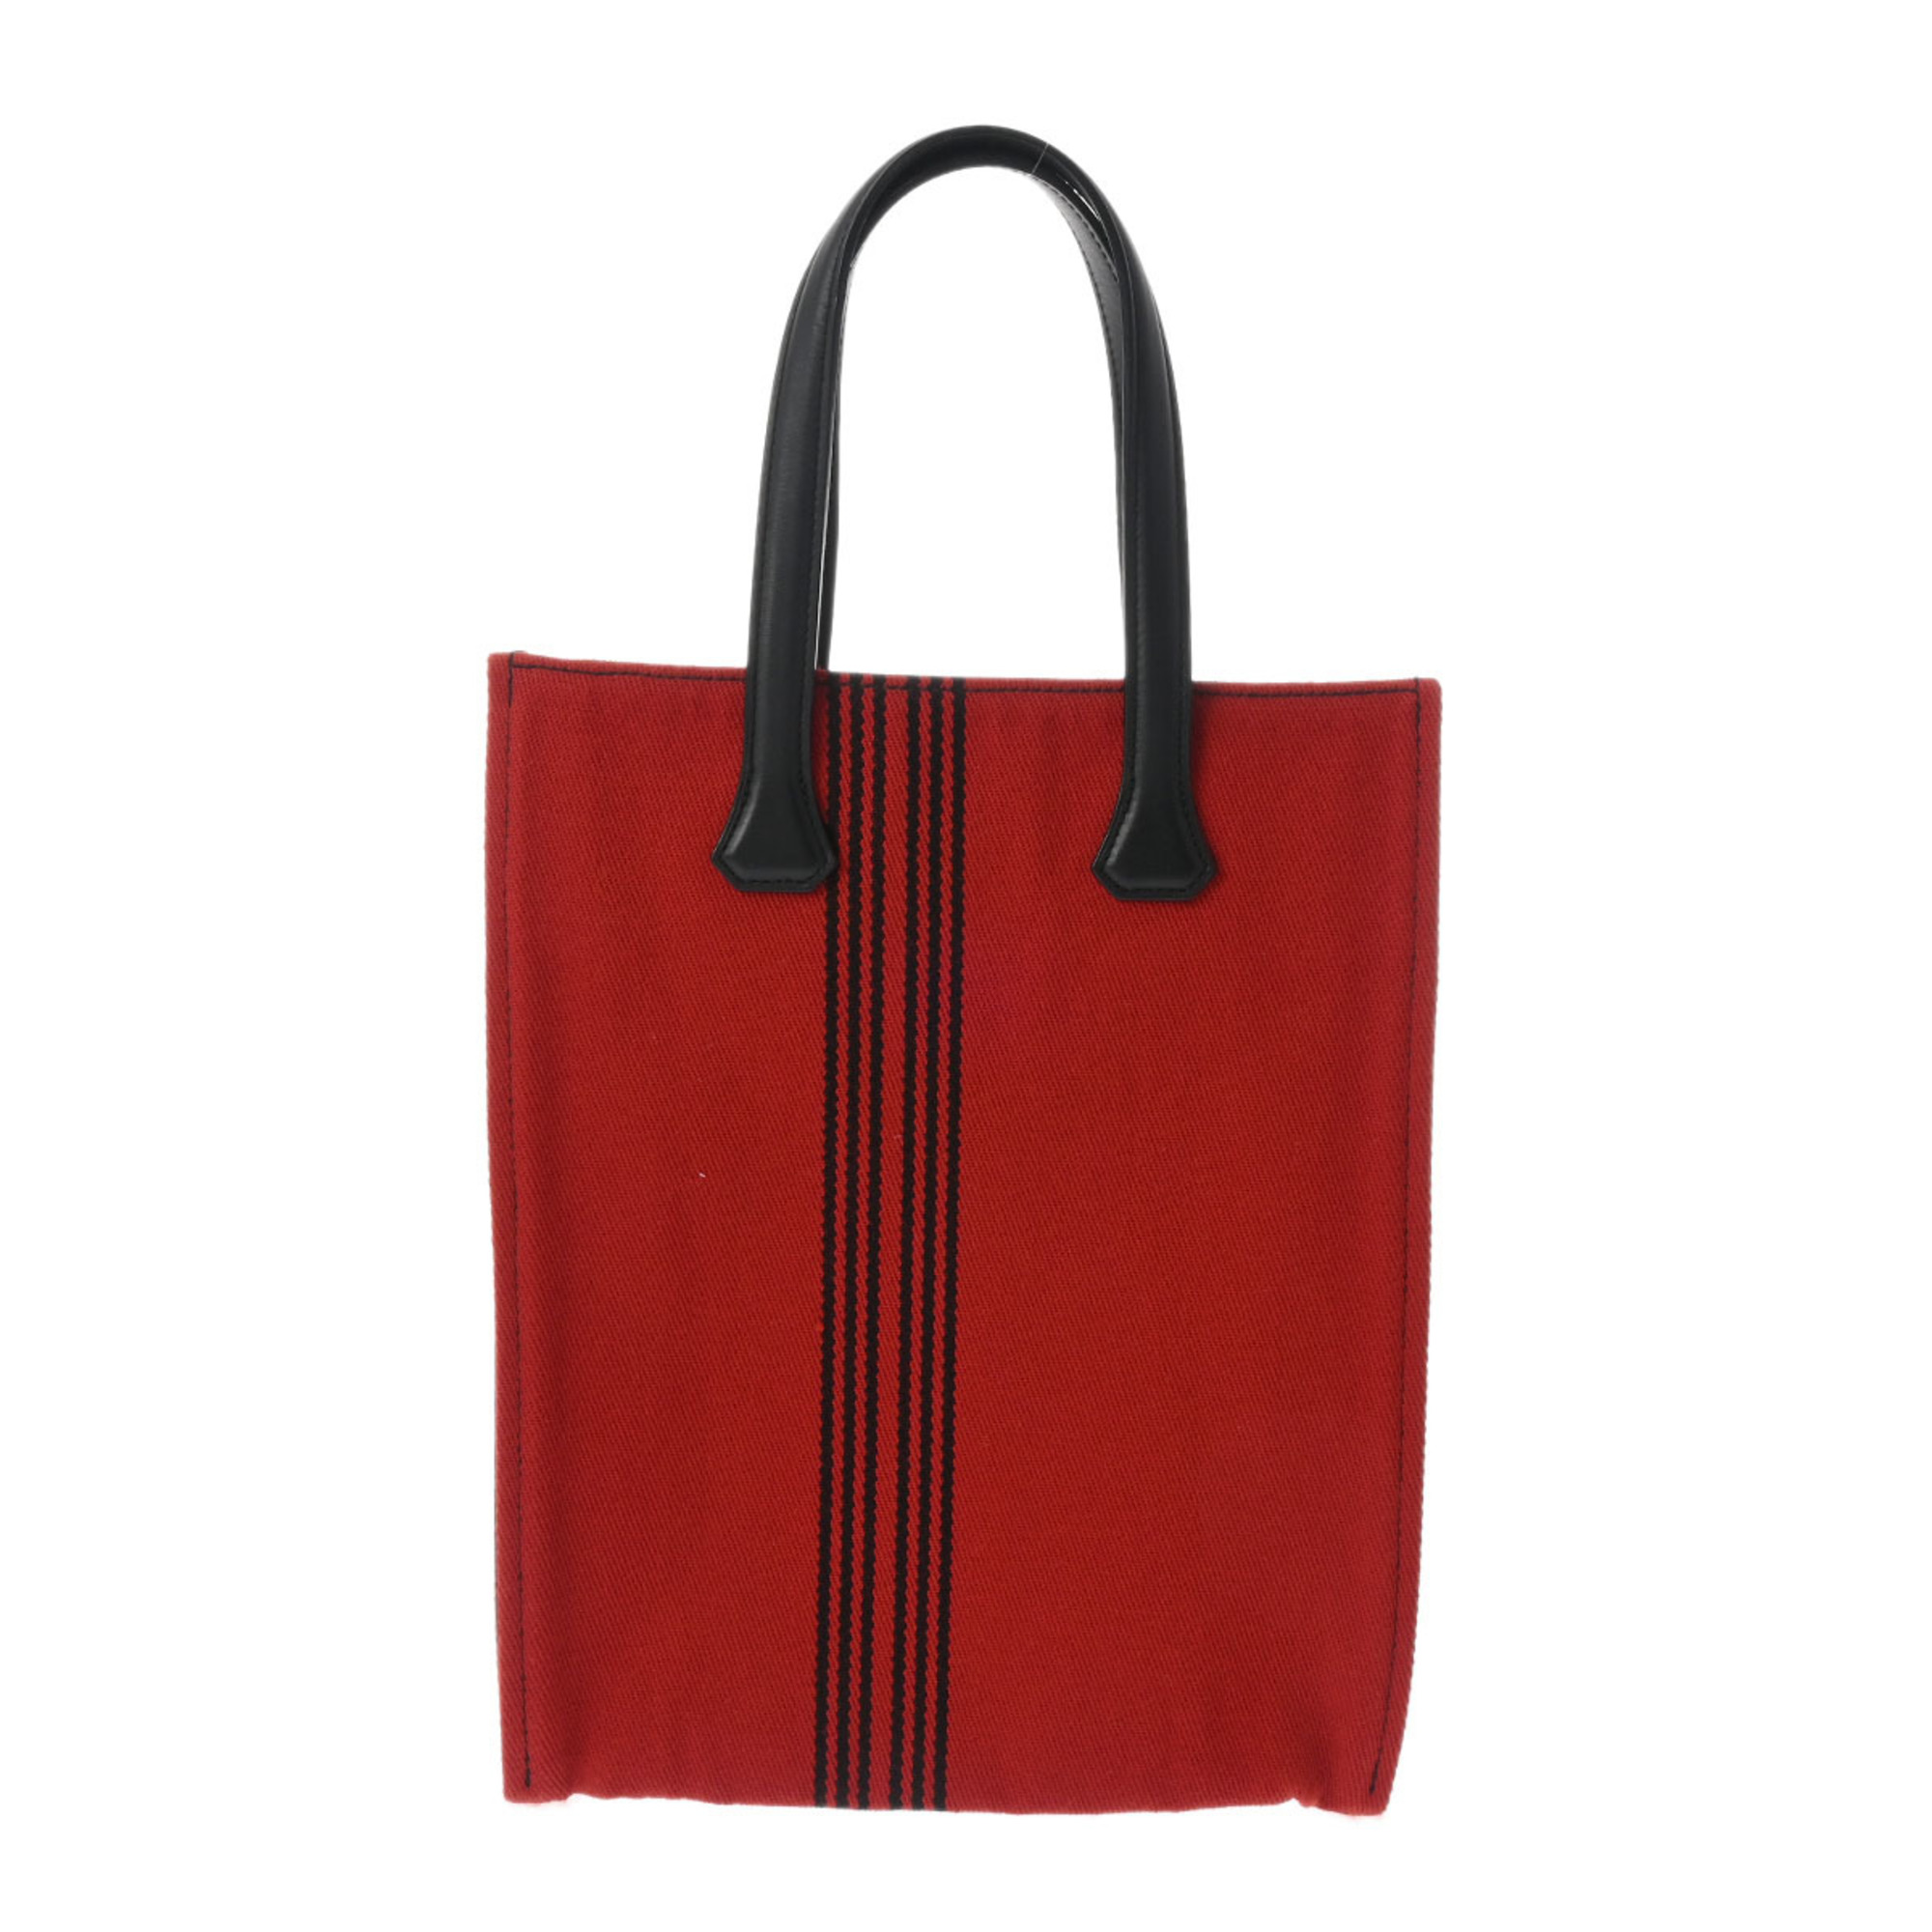 HERMES Potamos Cabas PM Red/Black Unisex Toile/Swift Leather Tote Bag